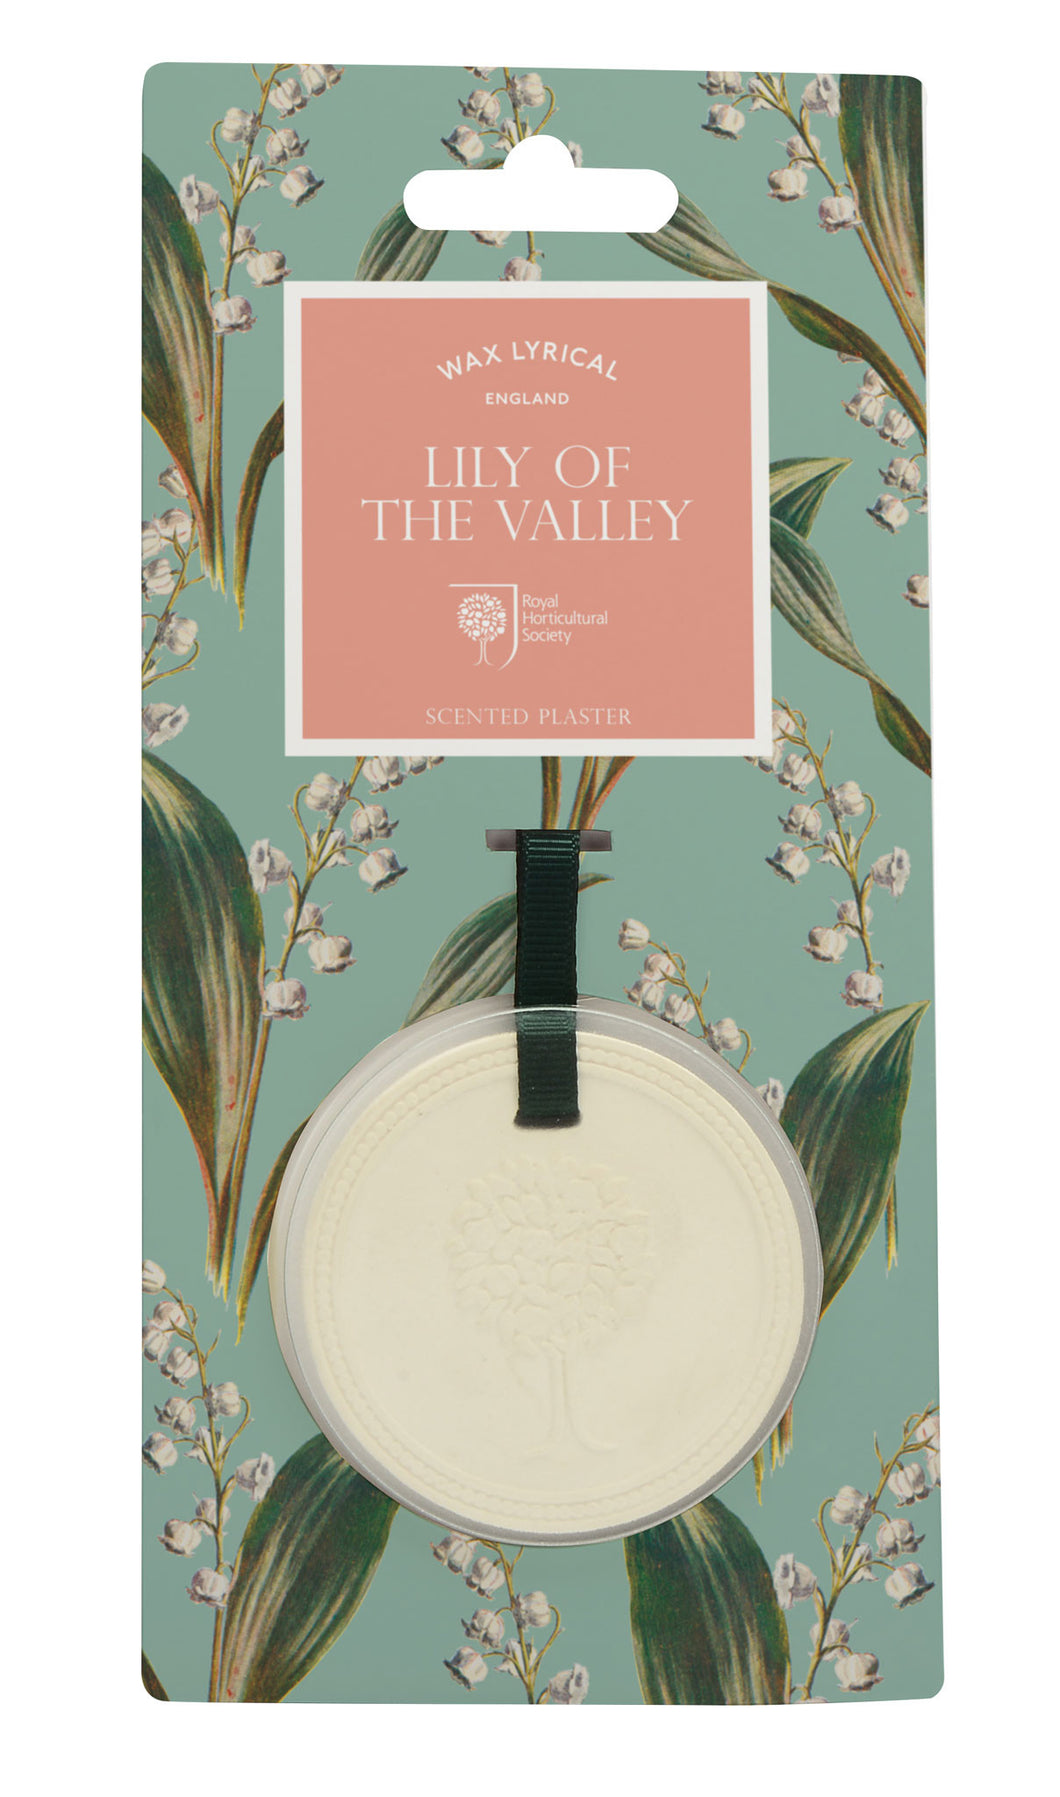 Wax Lyrical RHS Fragrant Garden Scented Plaque Lily of the Valley - LAST FEW AVAILABLE!